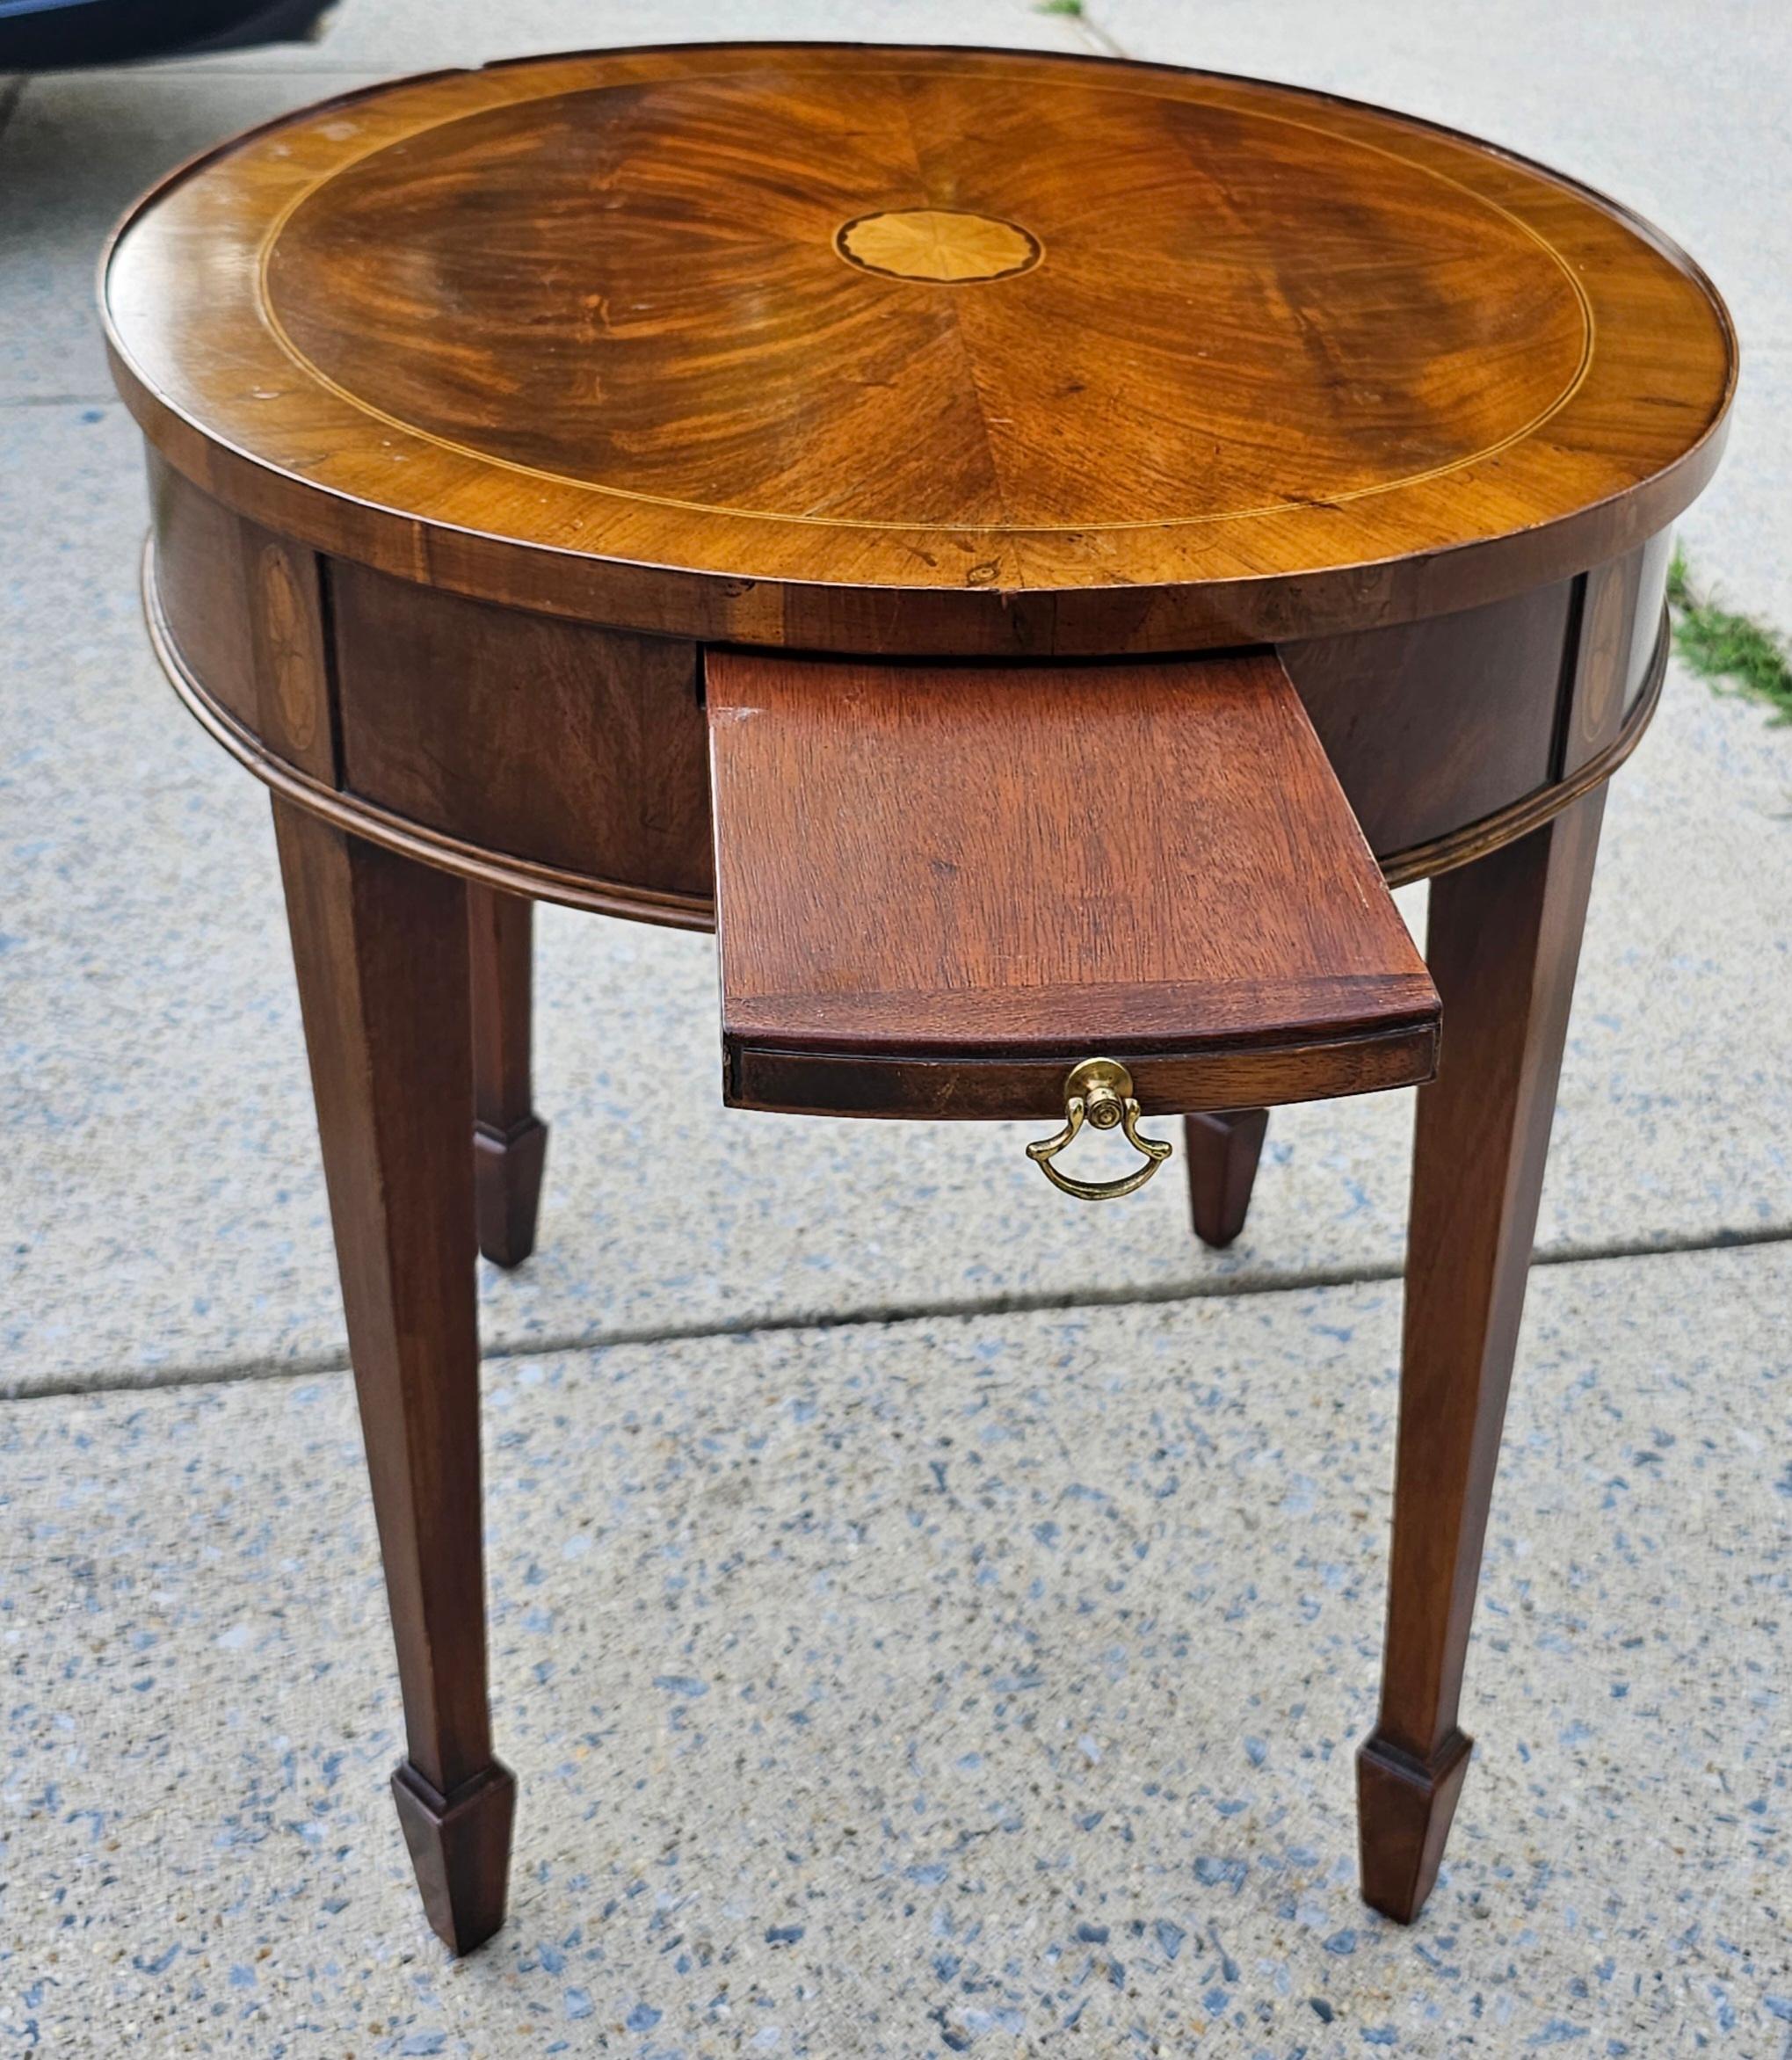 A Mid-Century Flame Mahogany Oval Gueridon Table With Pull-Out Tray with tapered legs.
Measures 23